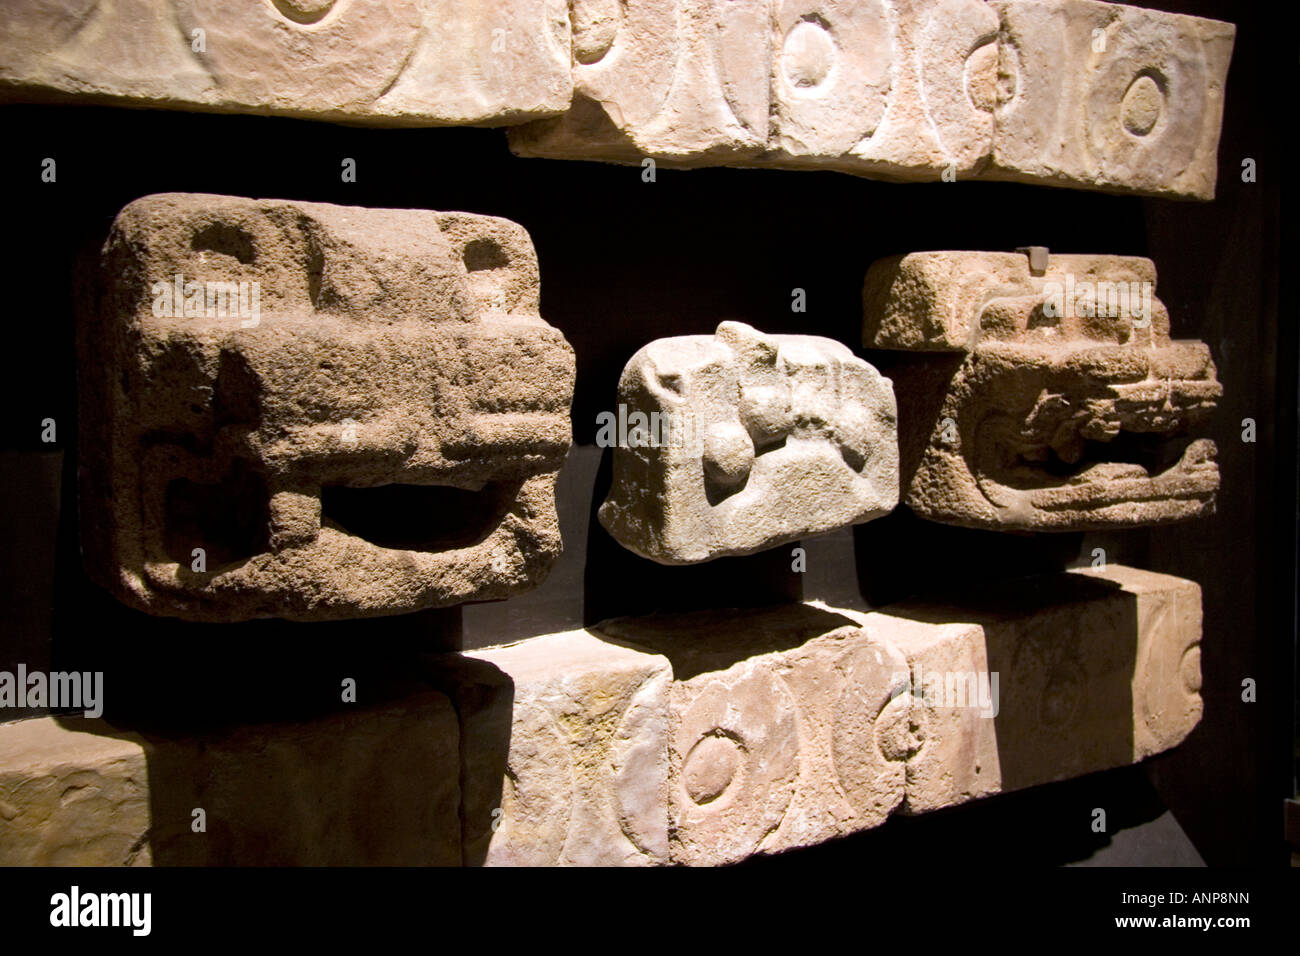 Carved serpent heads are artifacts from Teotihuacan on display in the National Museum of Anthropology in Mexico City Mexico Stock Photo